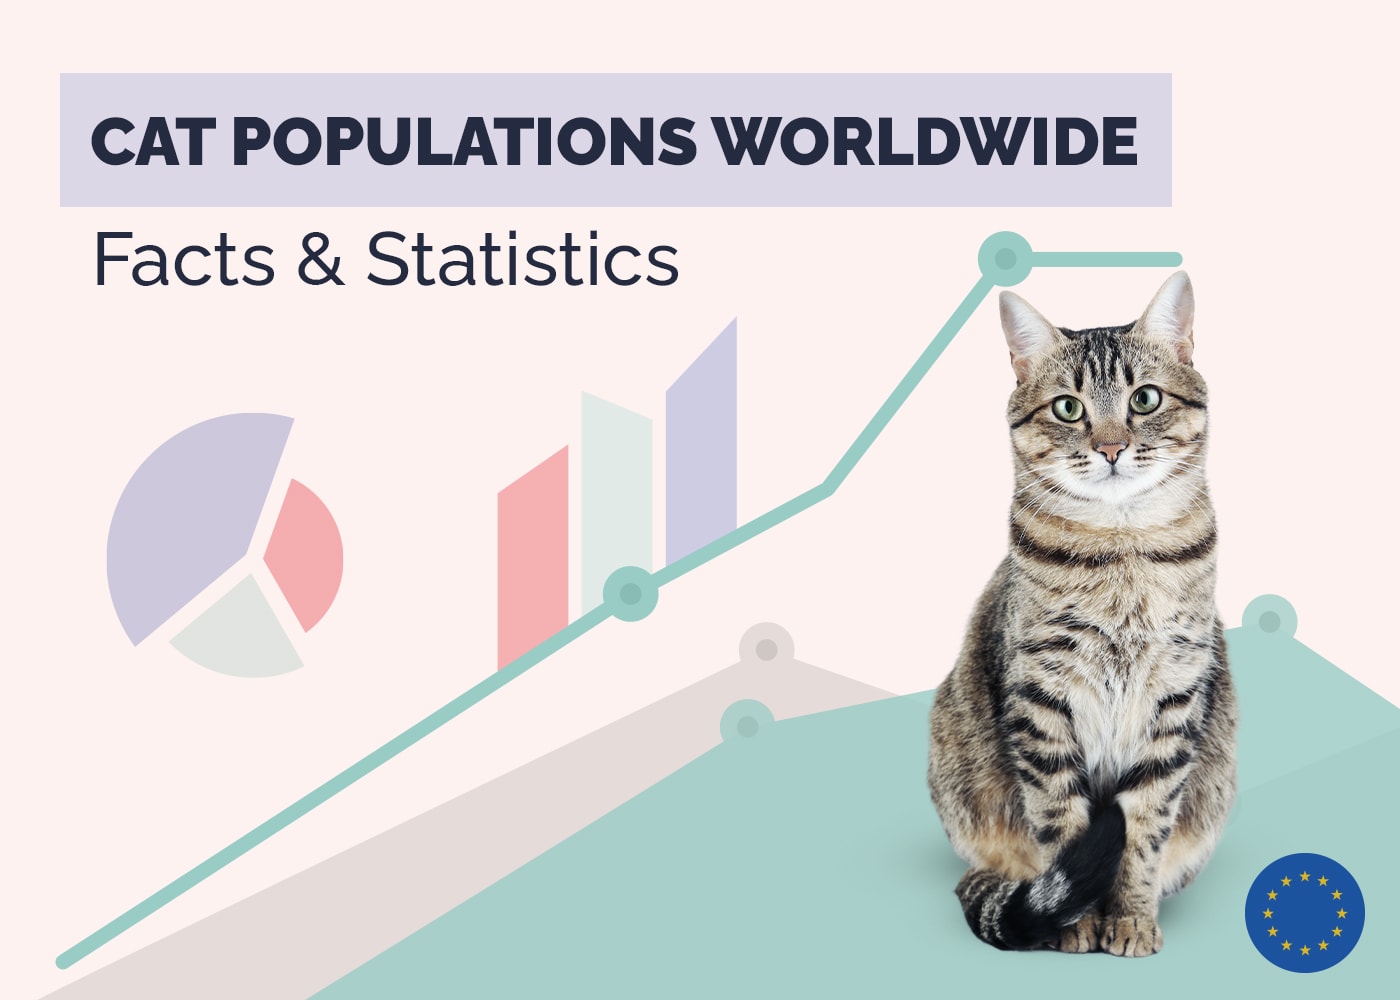 Cat population worldwide Facts and Statistics